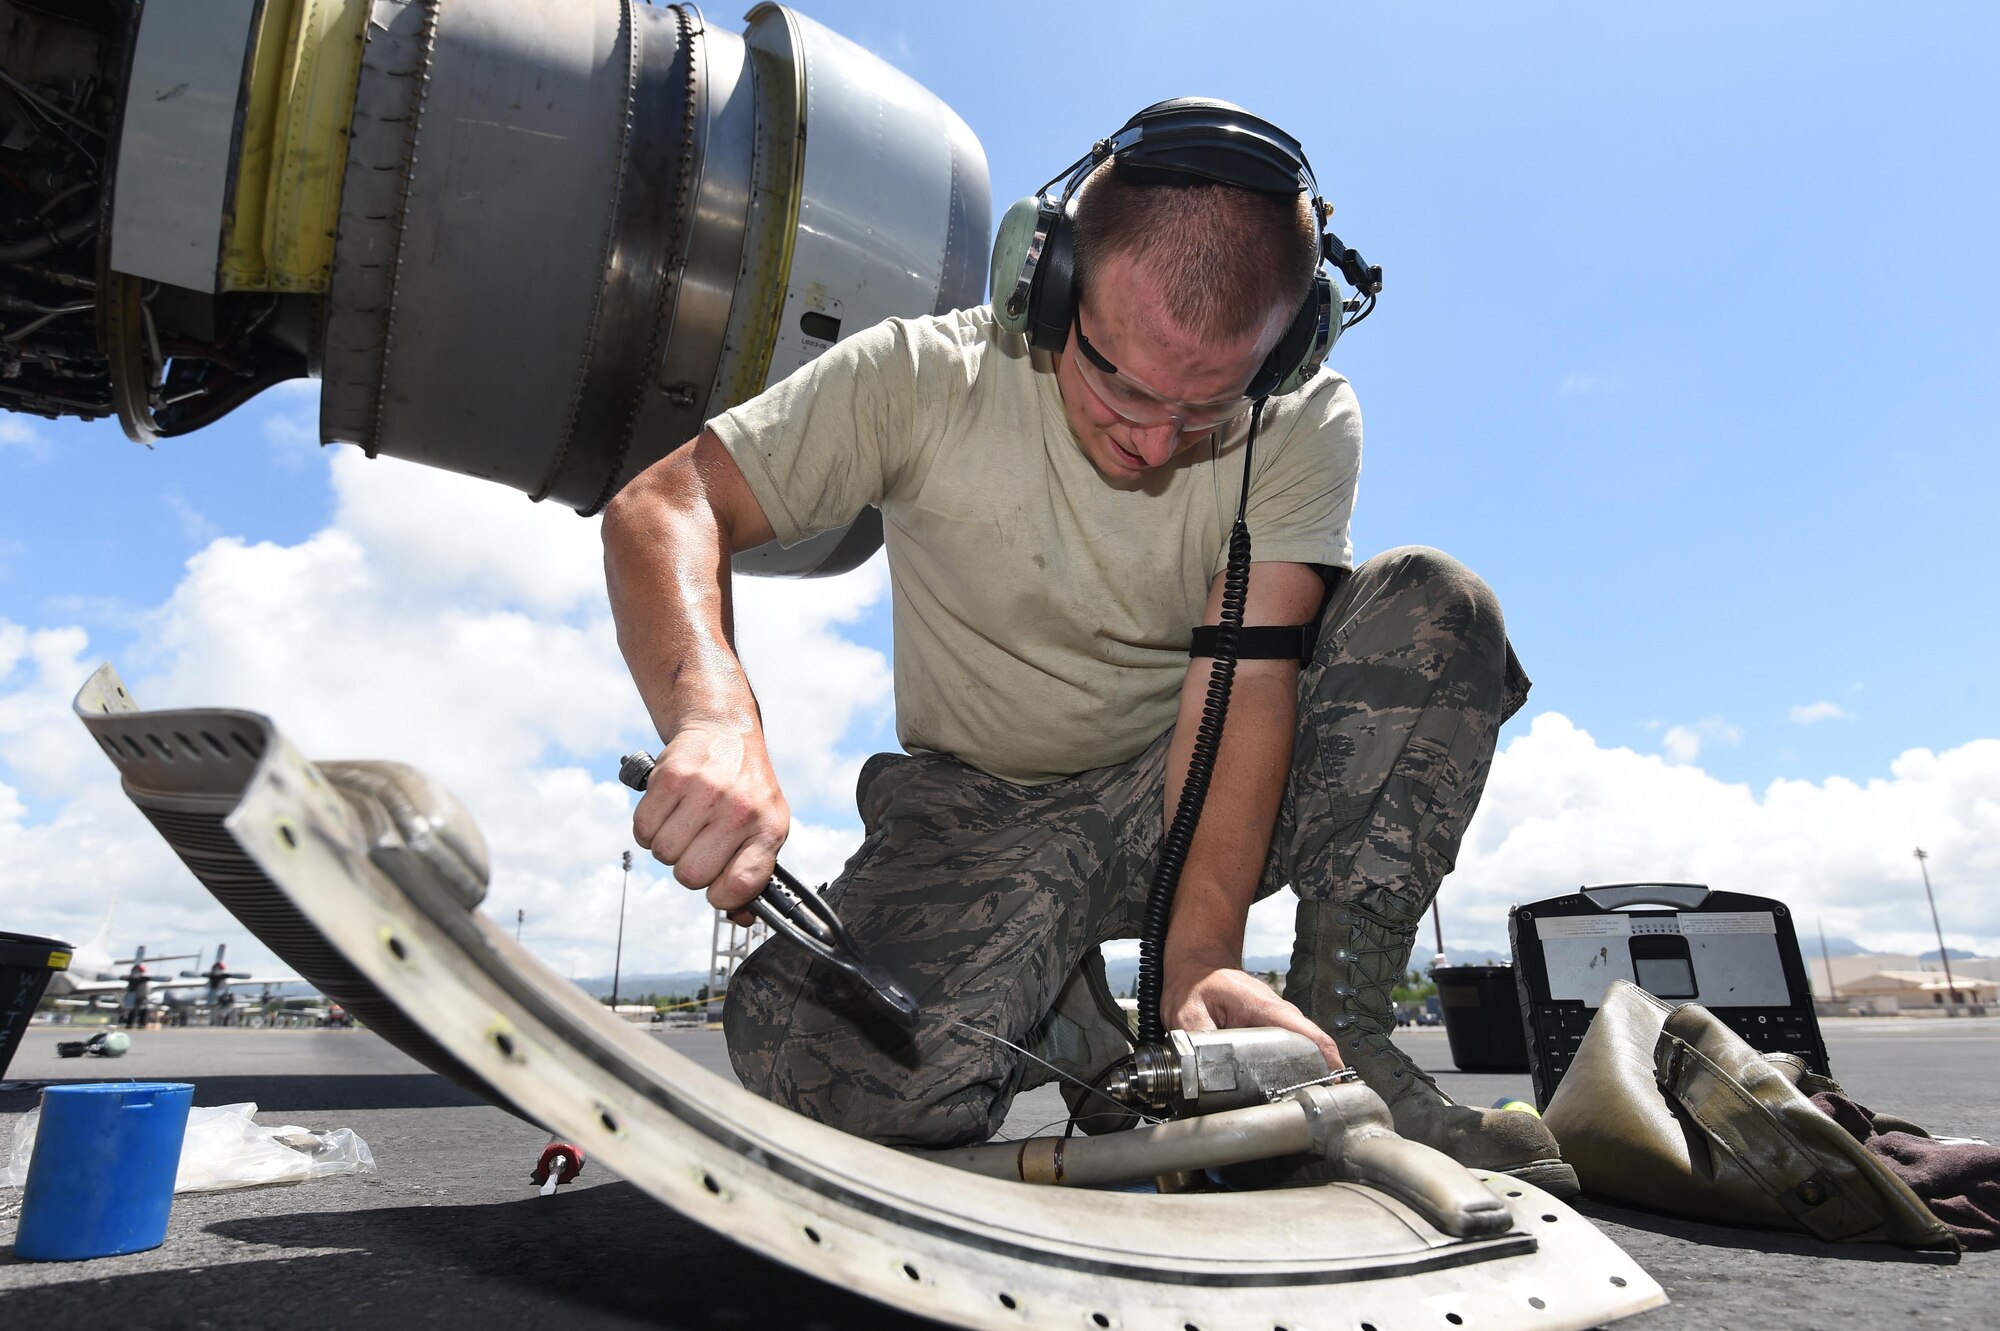 Staff Sgt. Austin Paisley, assigned to the 552nd Aircraft Maintenance Squadron, prepares an engine part for an E-3 Sentry on July 25, 2016, at Joint Base Pearl Harbor-Hickam, Hawaii. More than 125 Airmen from the 513th Air Control Group and 552nd Air Control Wing are deployed to Hawaii in support of the Rim of the Pacific 2016 exercise. Twenty-six nations, more than 40 ships and submarines, more than 200 aircraft and 25,000 personnel are participating in RIMPAC from June 30 to Aug. 4, in and around the Hawaiian Islands and Southern California. The world's largest international maritime exercise, RIMPAC provides a unique training opportunity that helps participants foster and sustain the cooperative relationships that are critical to ensuring the safety of sea lanes and security on the world's oceans. RIMPAC 2016 is the 25th exercise in the series that began in 1971. (U.S. Air Force photo by 2nd Lt. Caleb Wanzer)